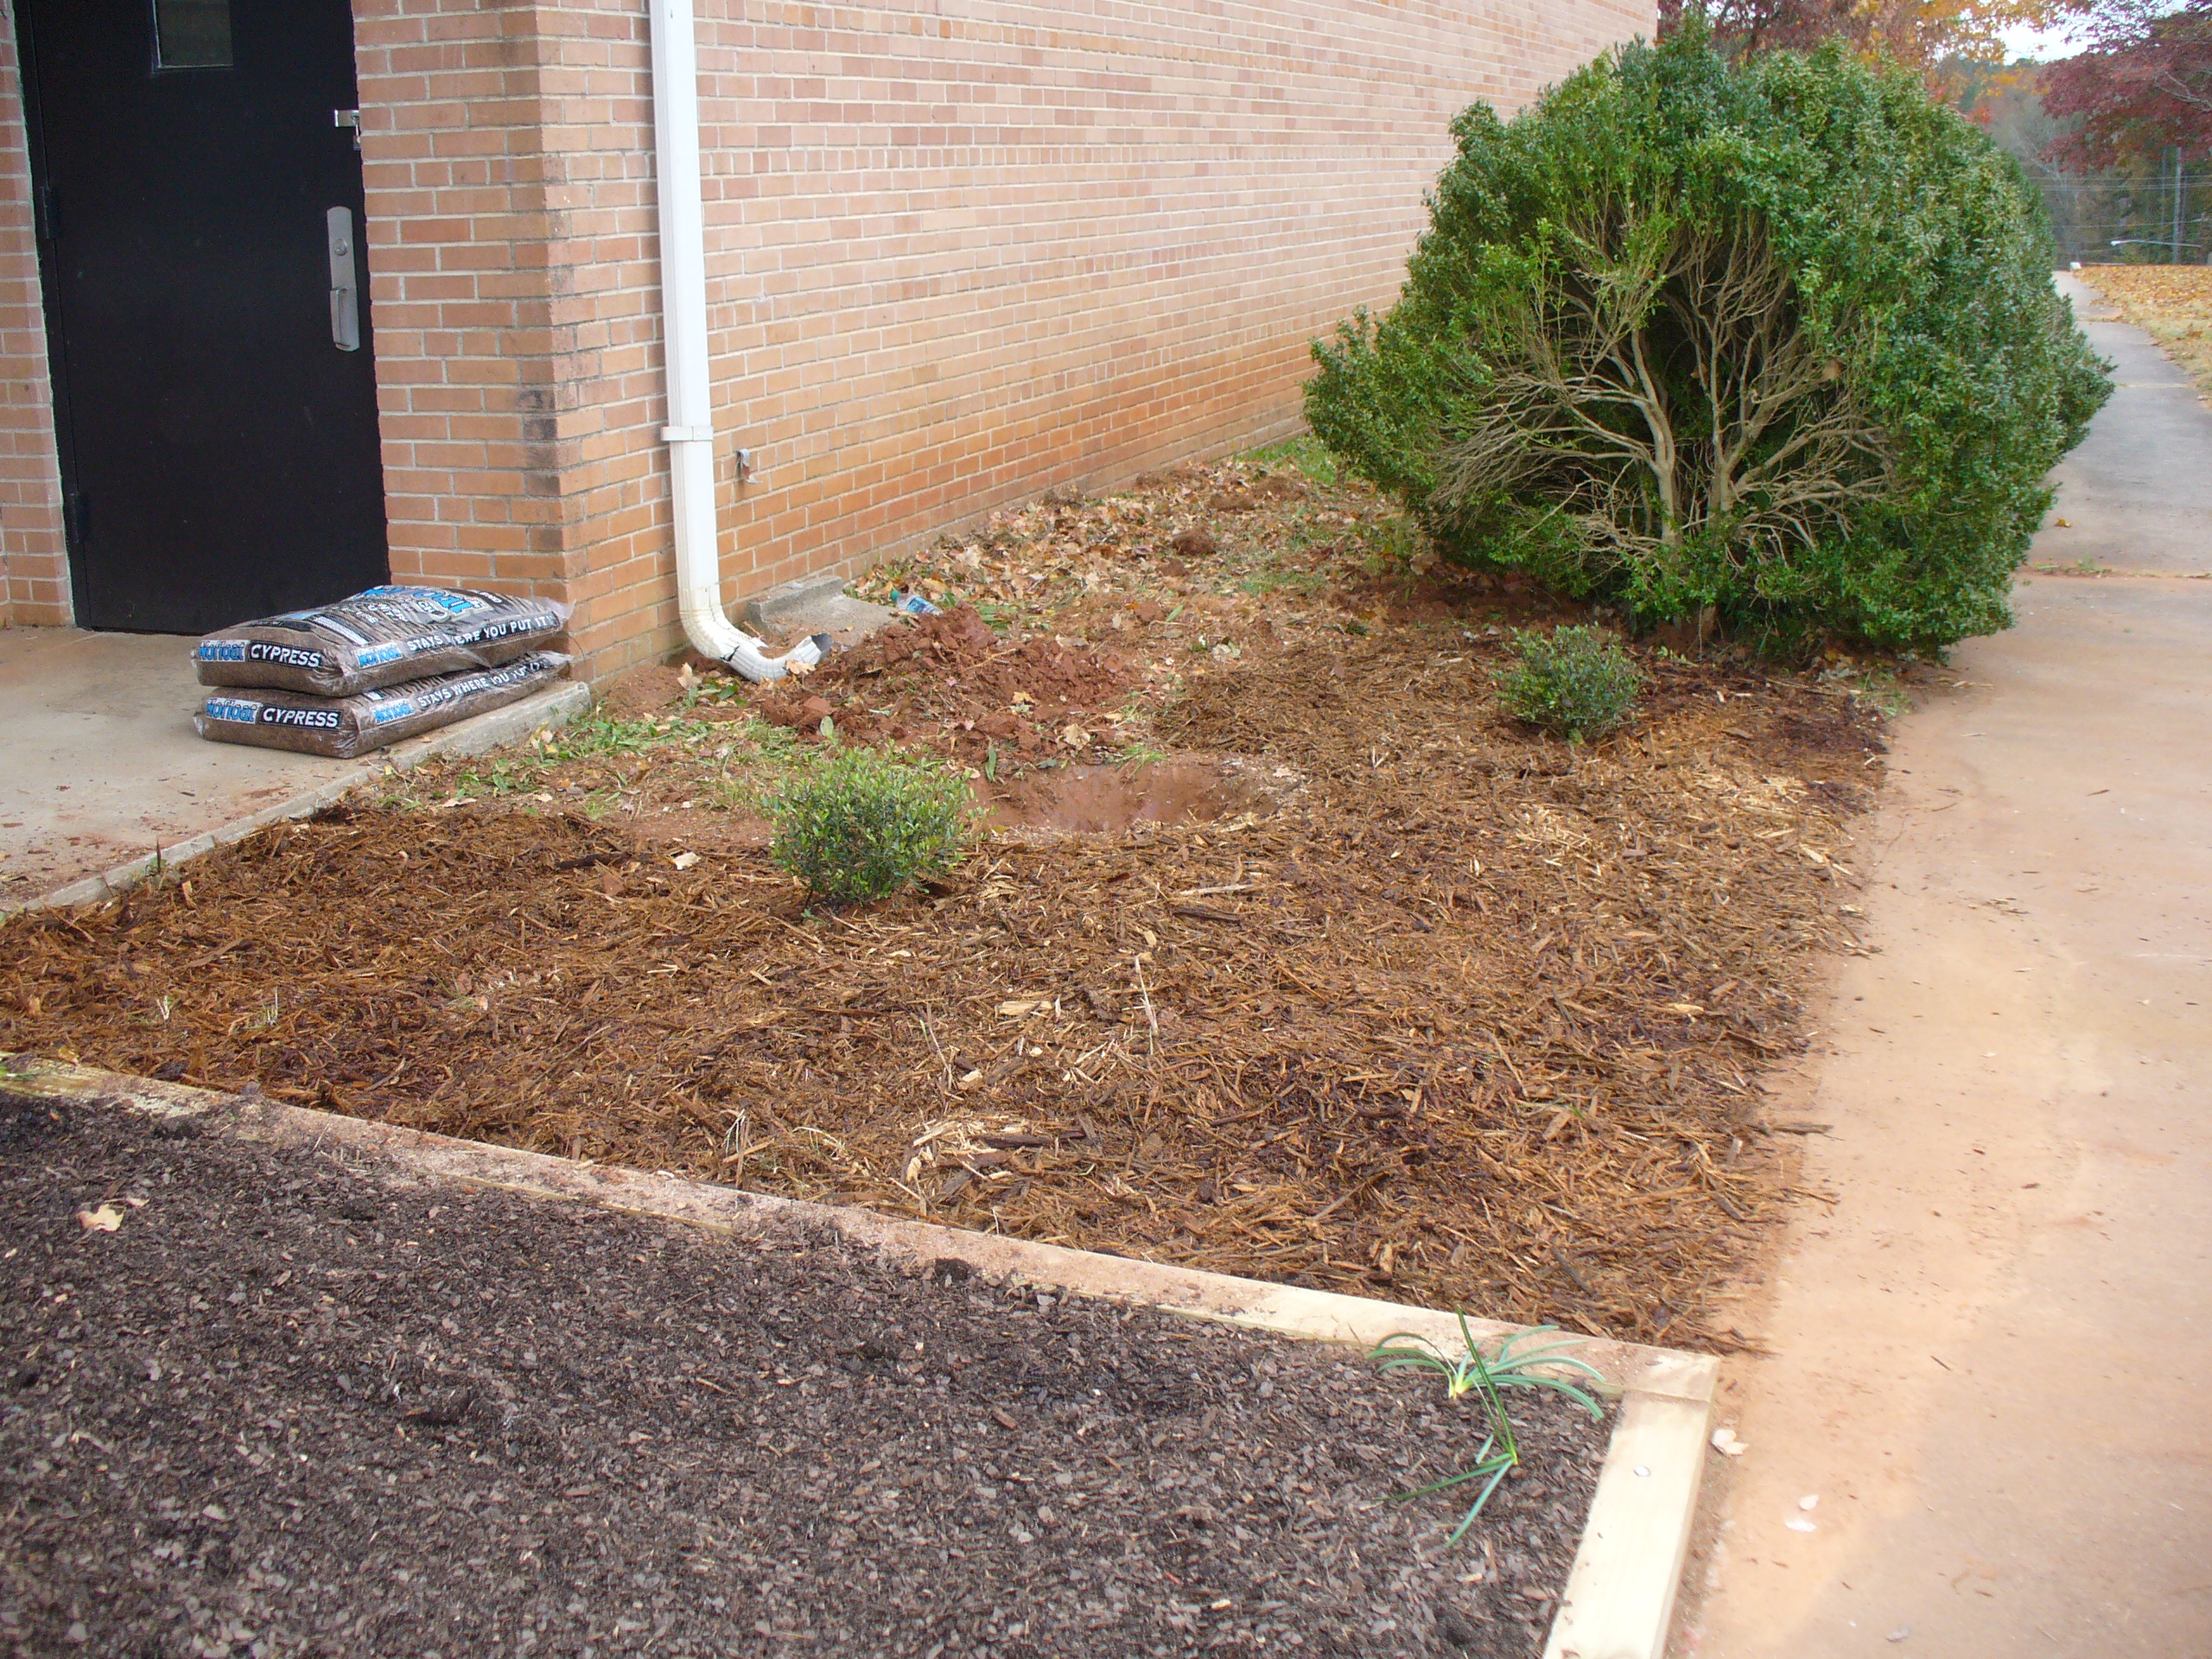 Landscaping bed partly planted with bushes